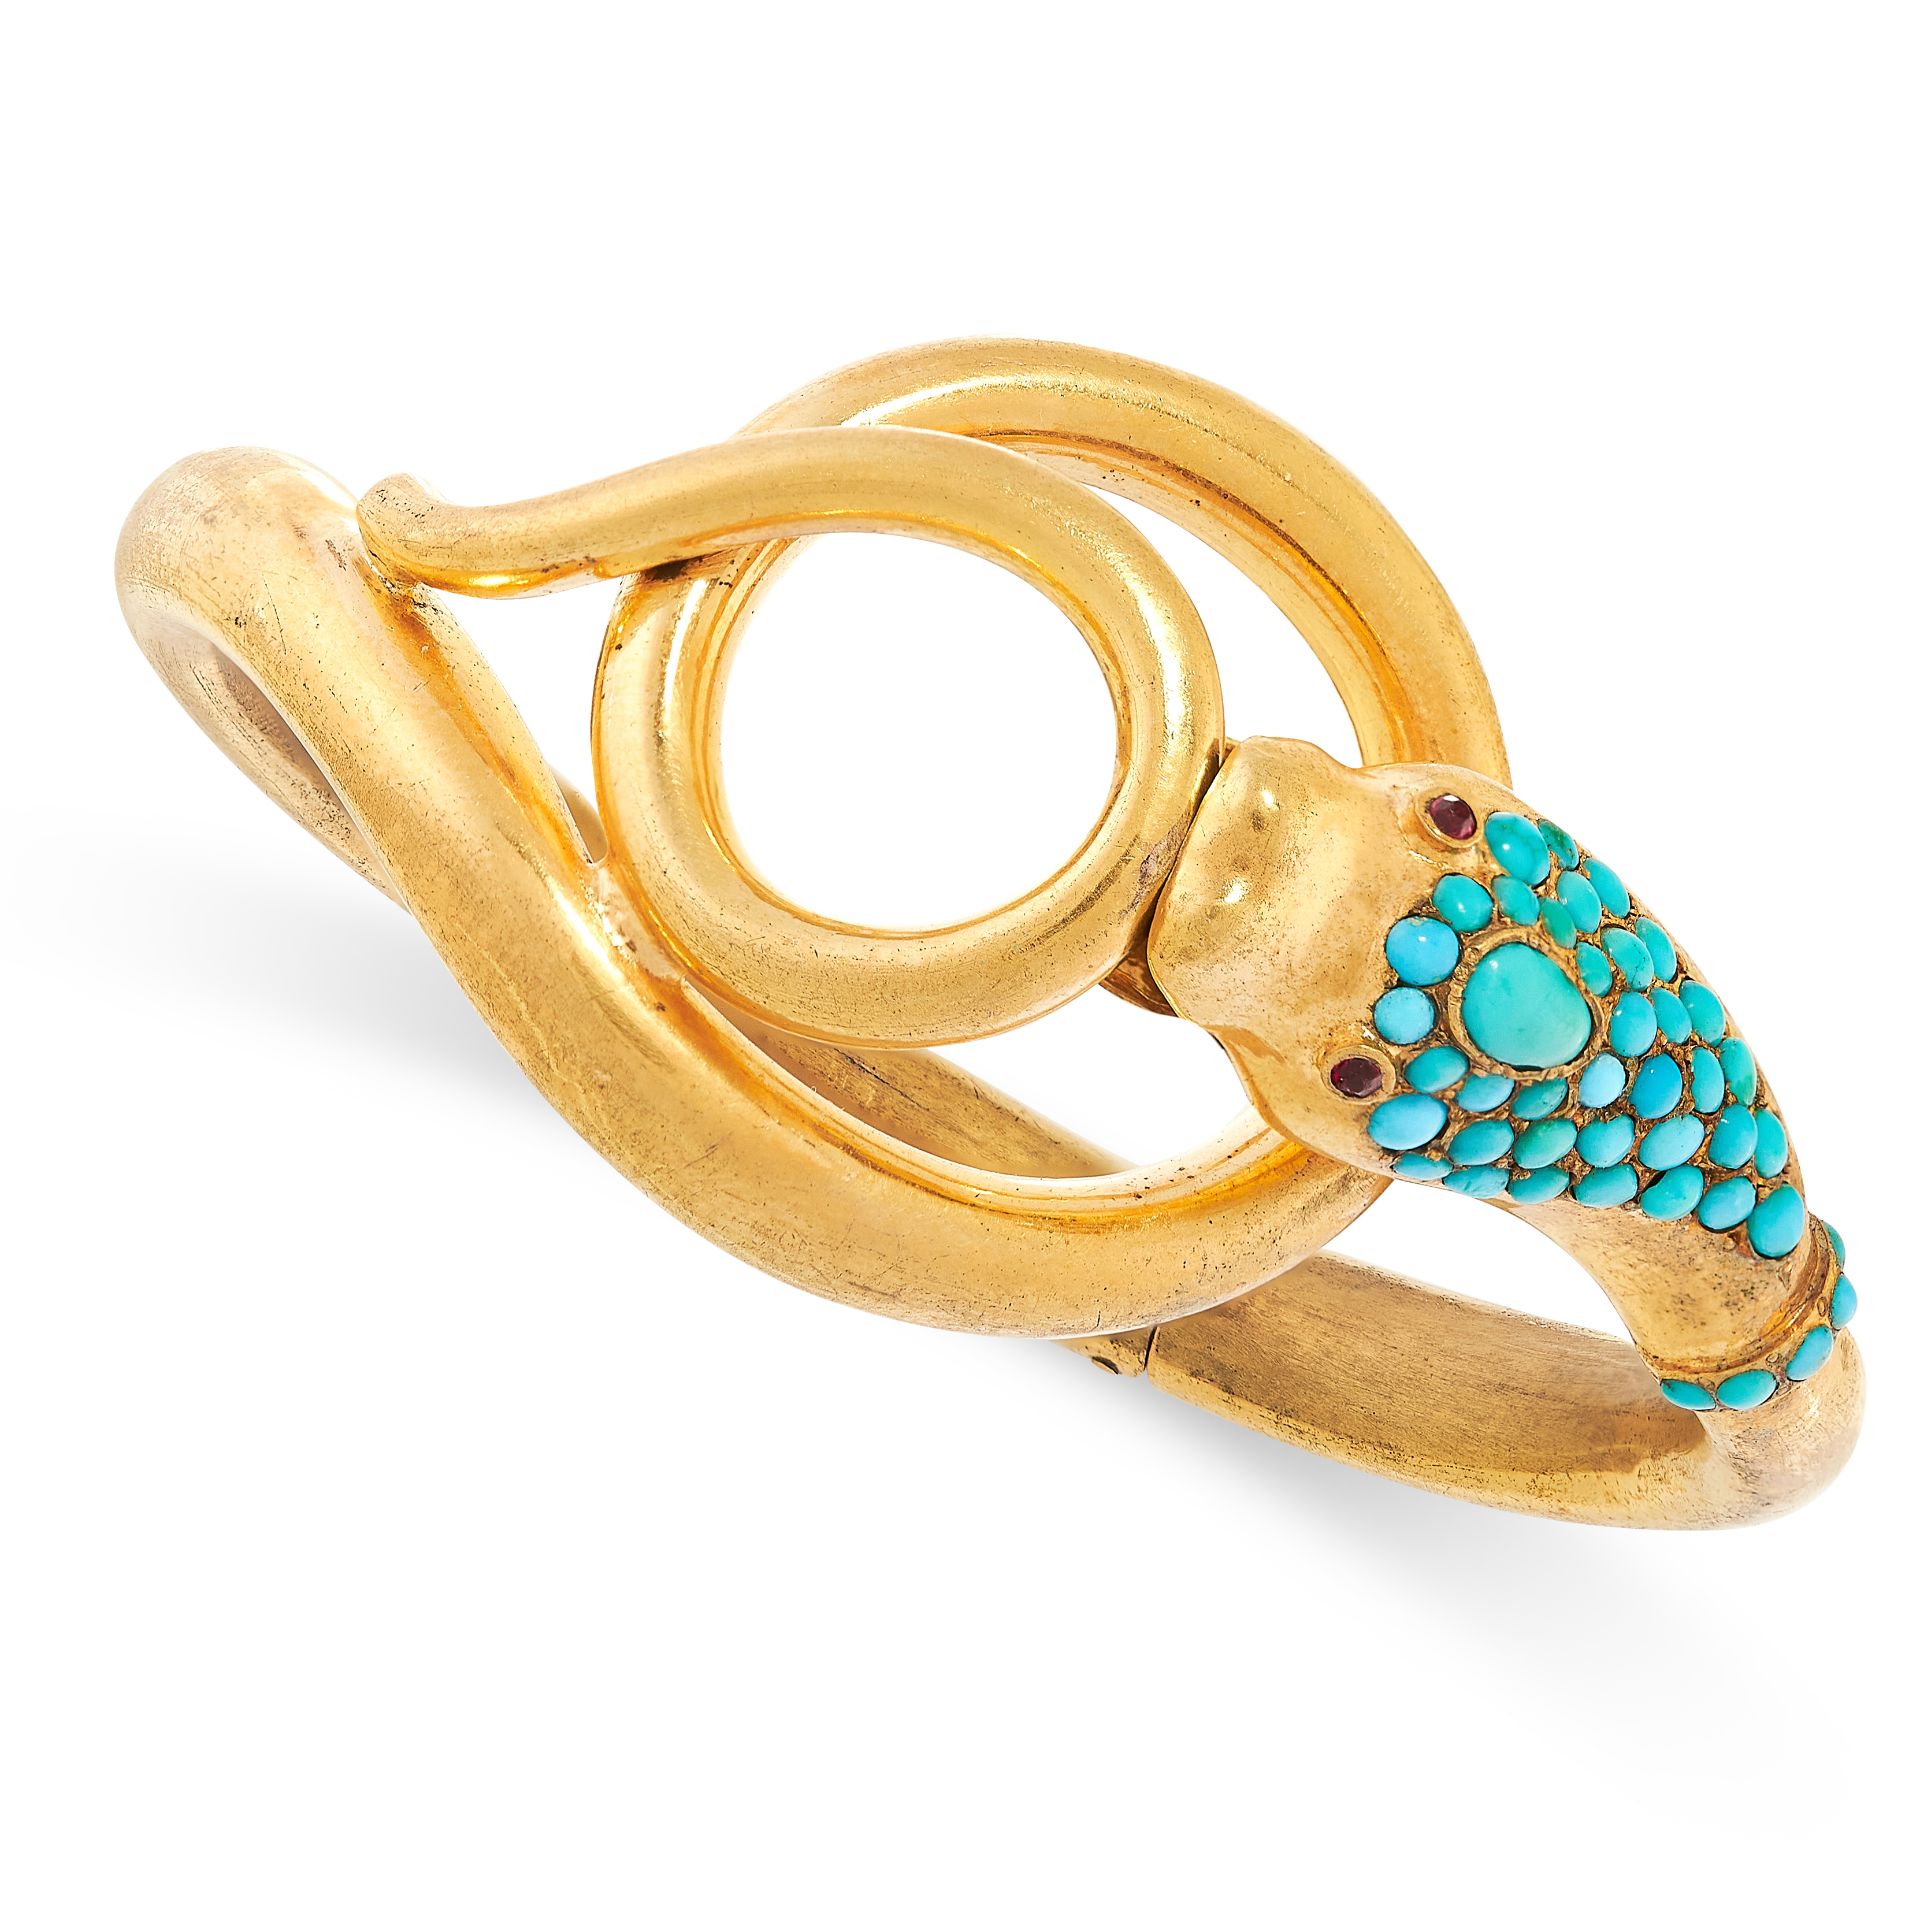 ANTIQUE TURQUOISE SNAKE BANGLE, 19TH CENTURY designed as the body of a snake coiled around on